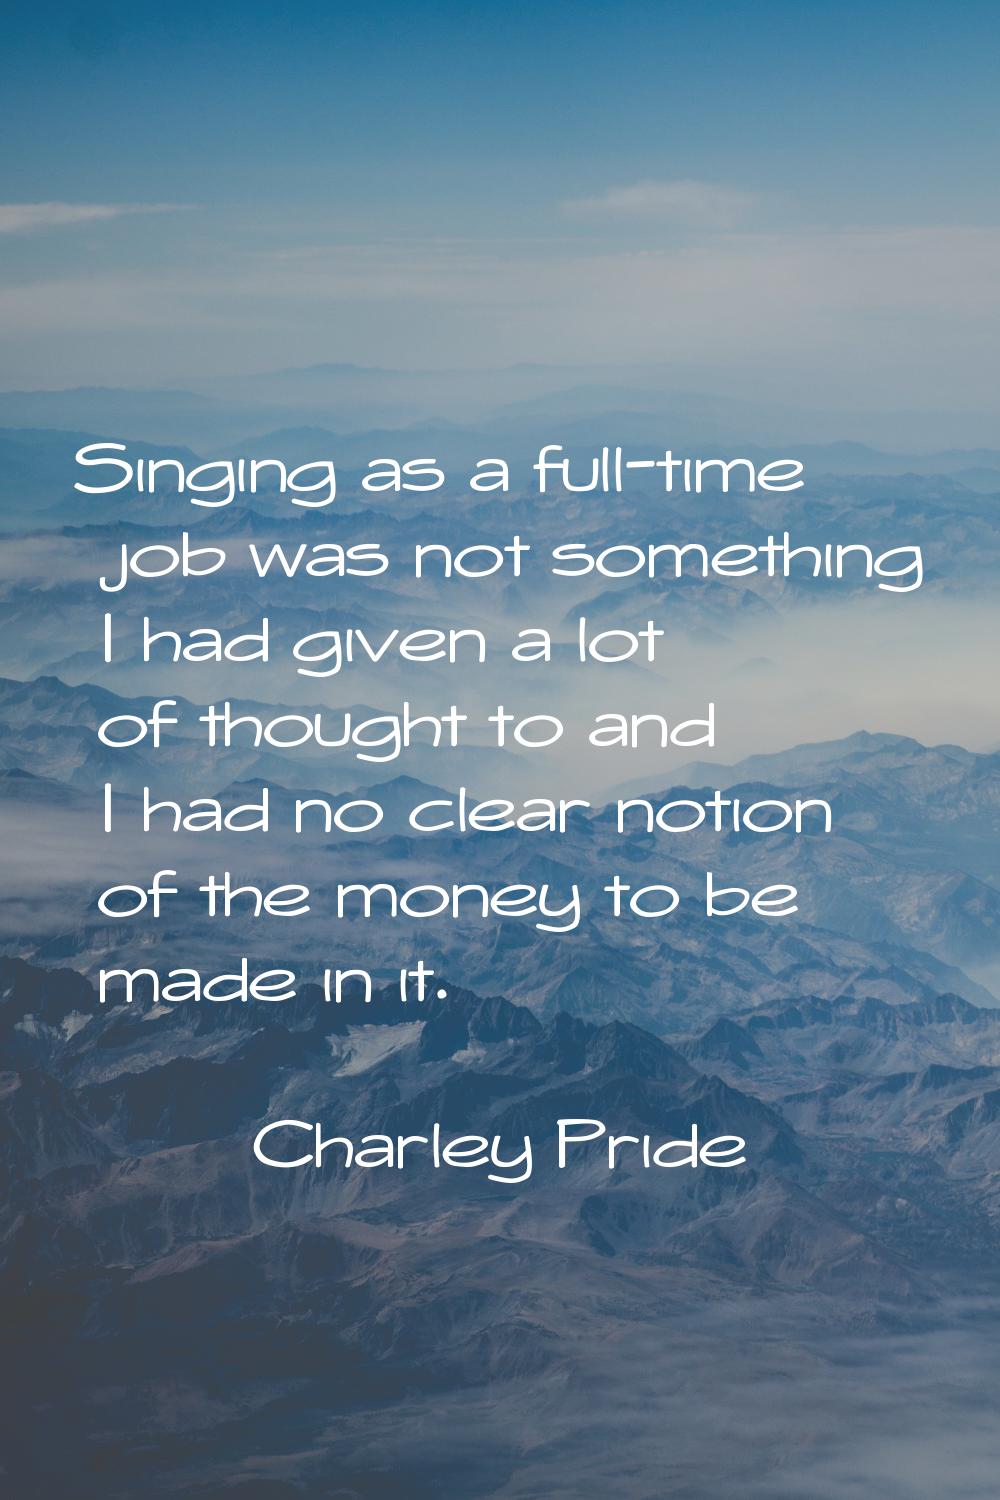 Singing as a full-time job was not something I had given a lot of thought to and I had no clear not